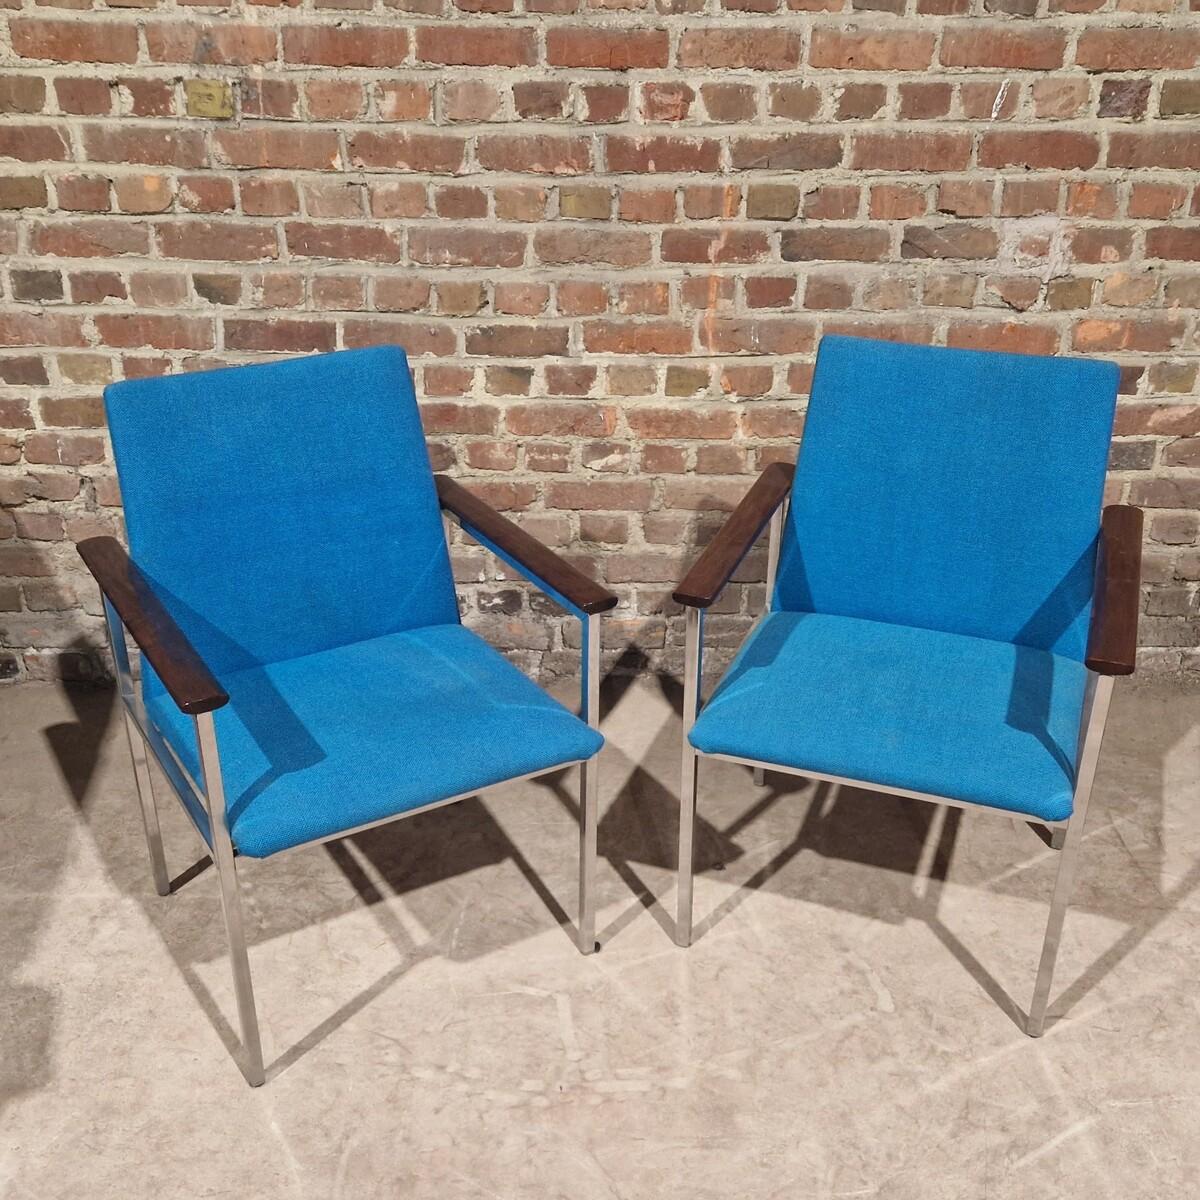 Pair of armchairs by Sigvard Bernadotte for France & Son, 1960s. 3 pairs available, in very good condition